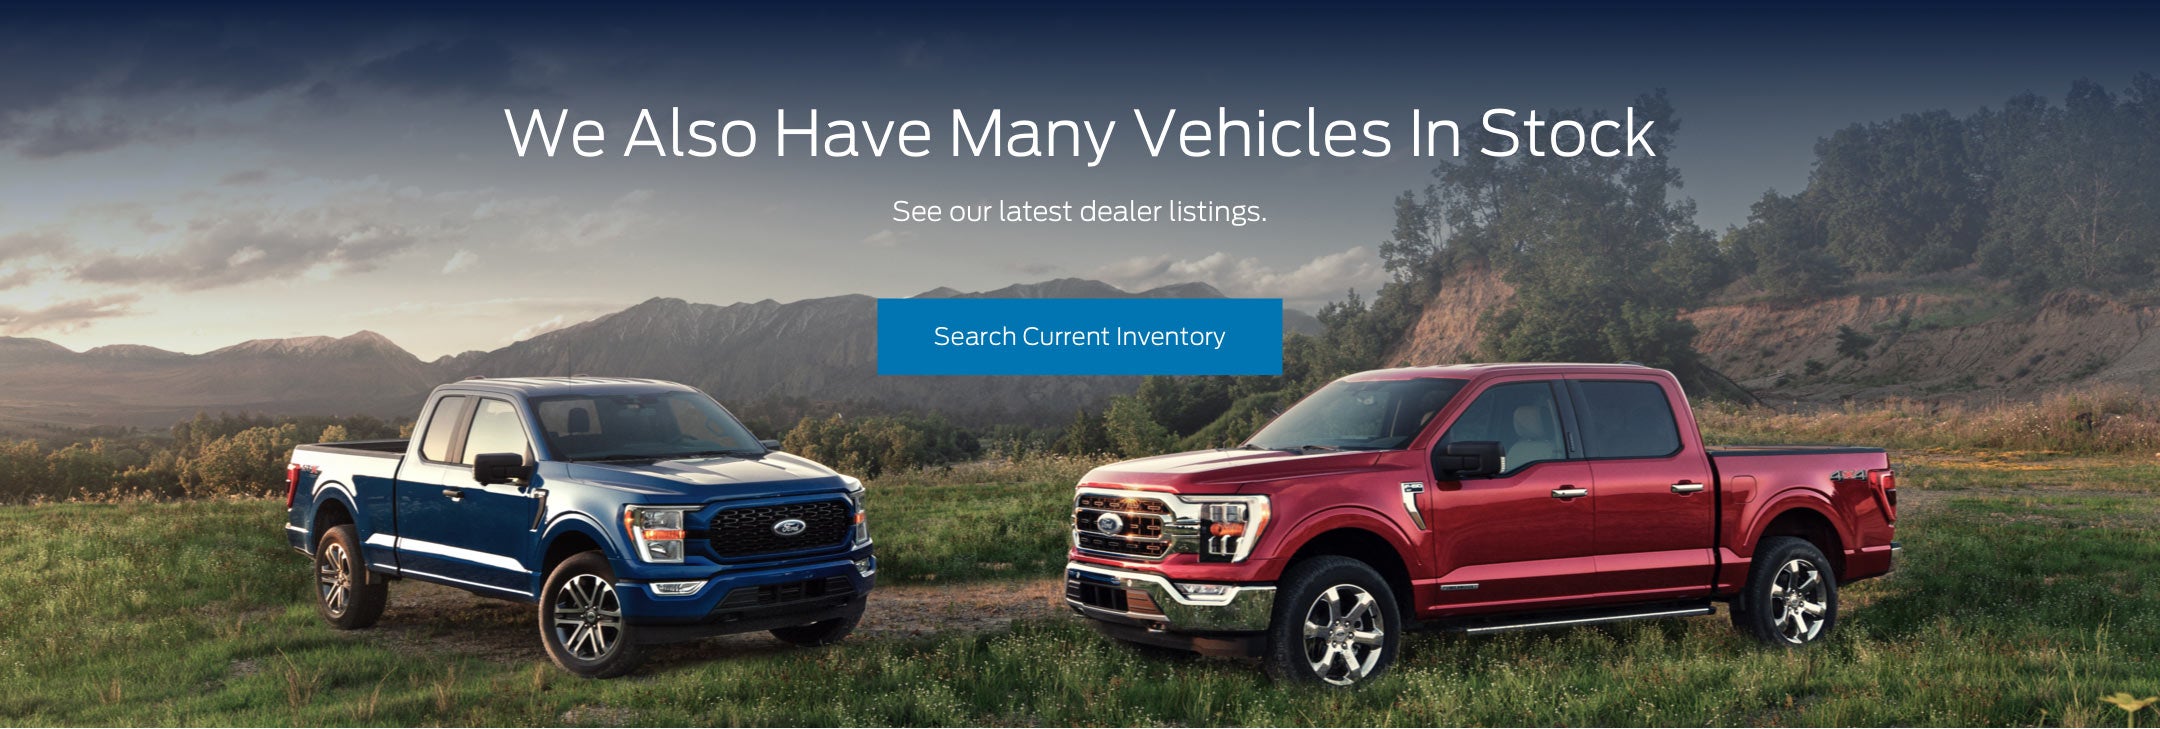 Ford vehicles in stock | Crossroads Ford Fuquay-Varina in Fuquay Varina NC